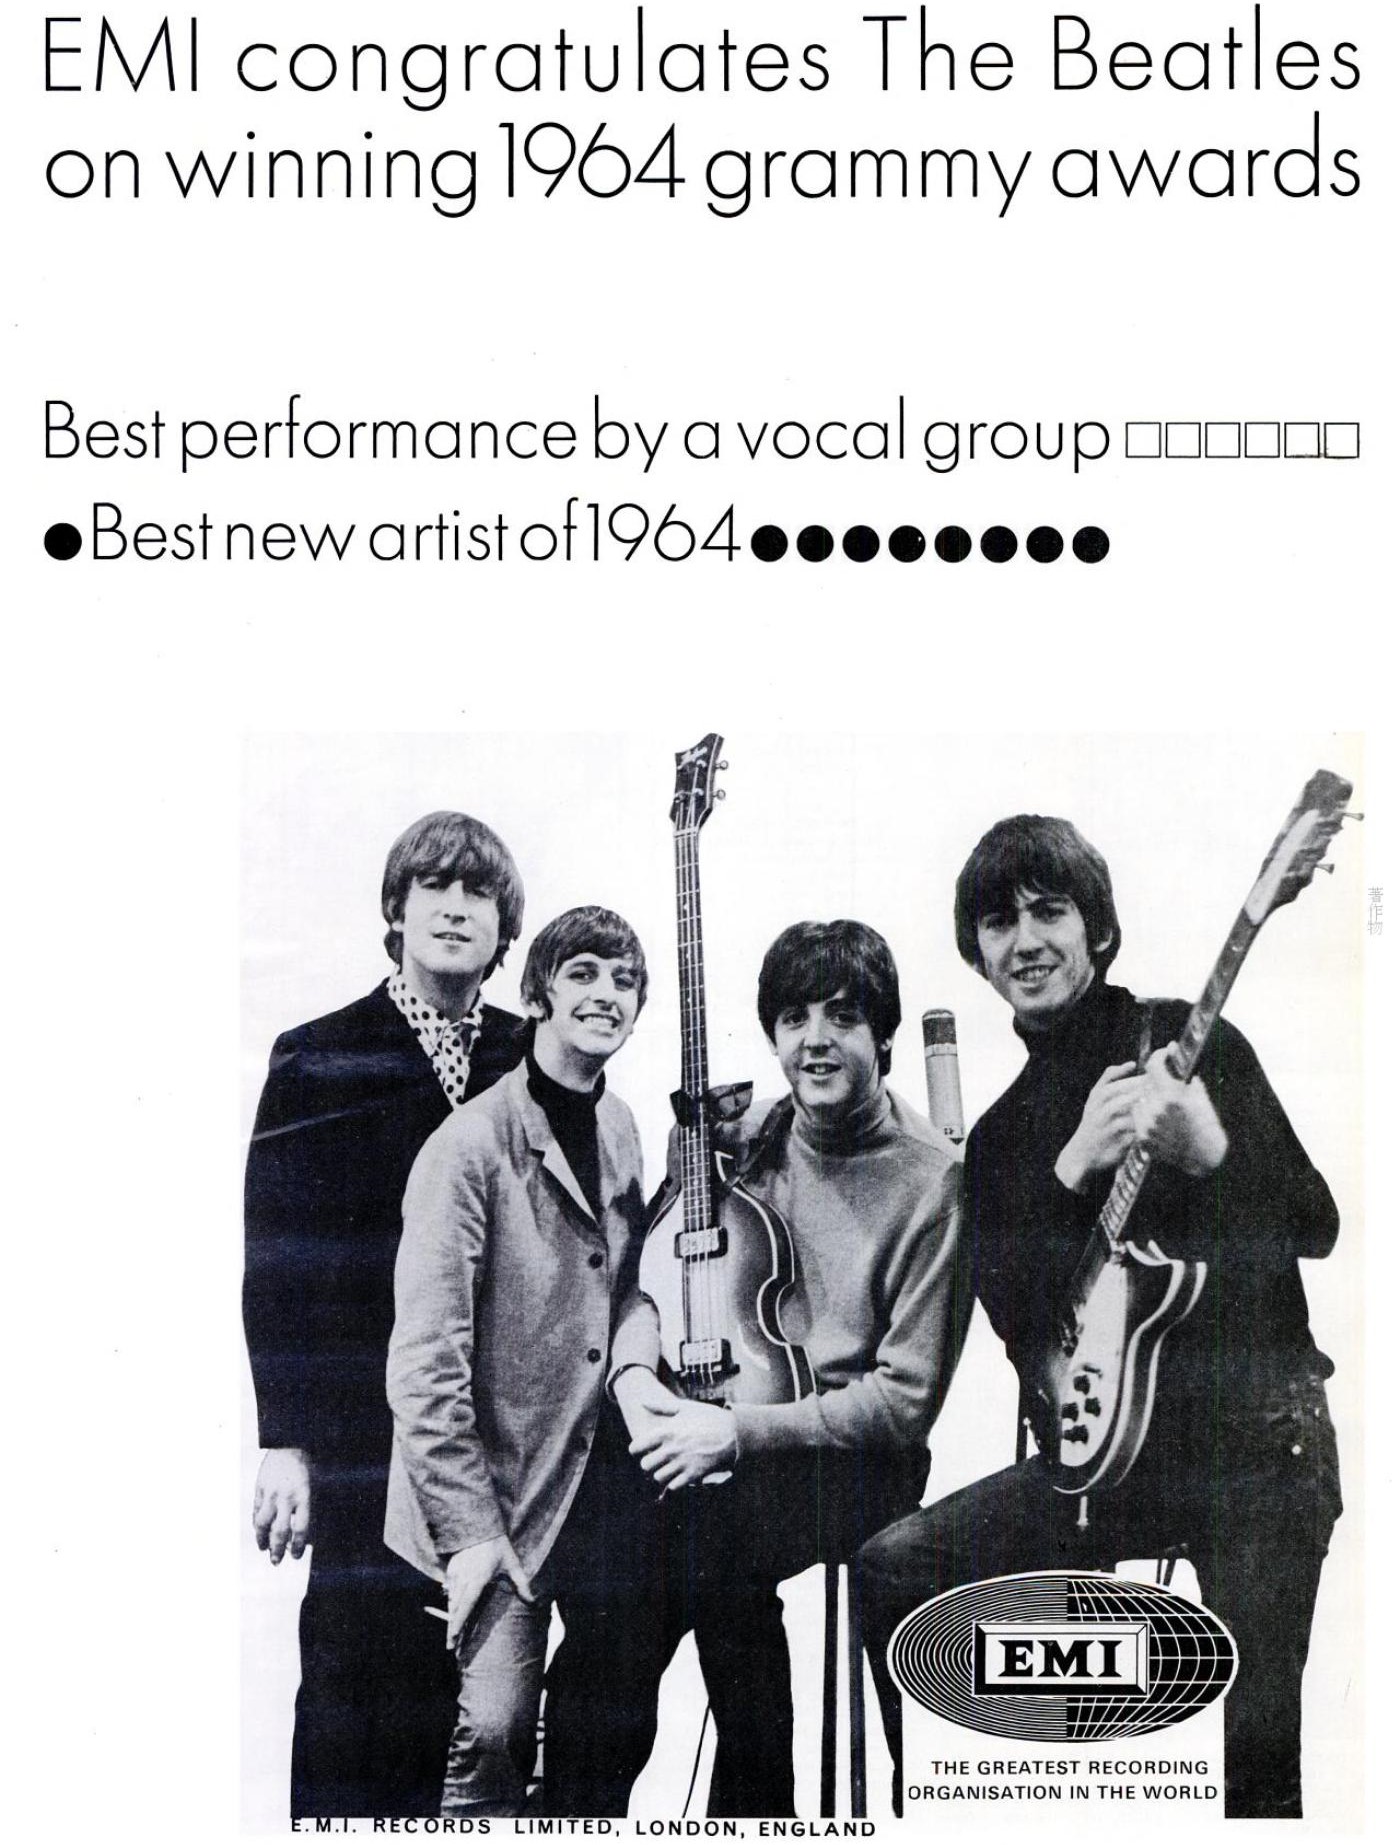 An advertisement celebrating the two awards won by the Beatles at the Seventh Annual Grammy Awards, placed by their distributor, EMI.